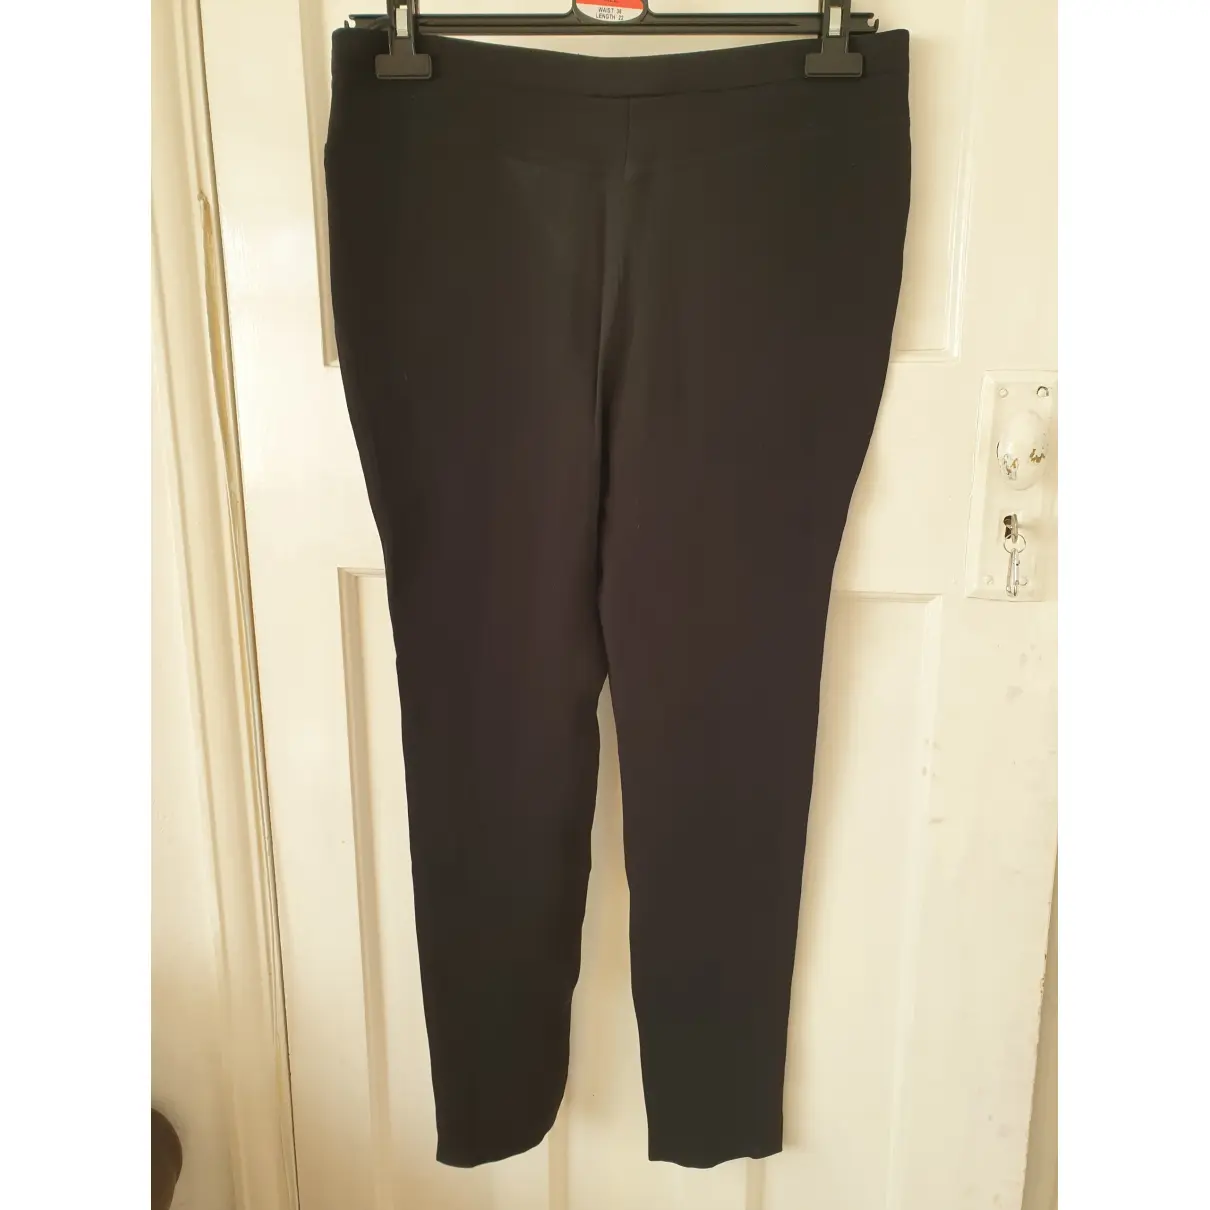 Buy Chanel Cloth trousers online